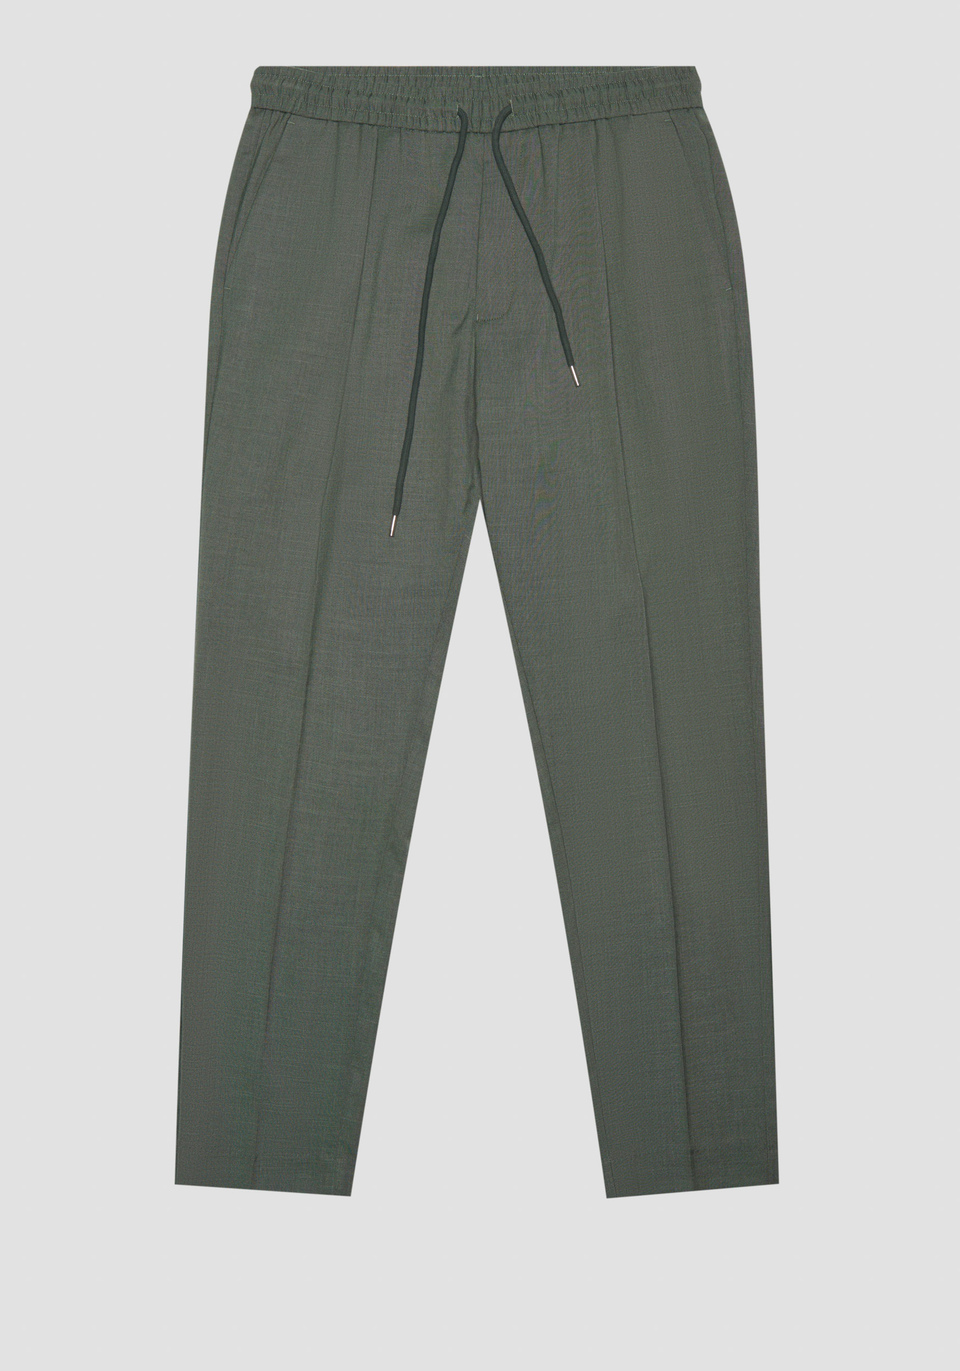 NEIL REGULAR FIT TROUSERS IN SLUB STRETCH VISCOSE BLEND FABRIC WITH  DRAWSTRING